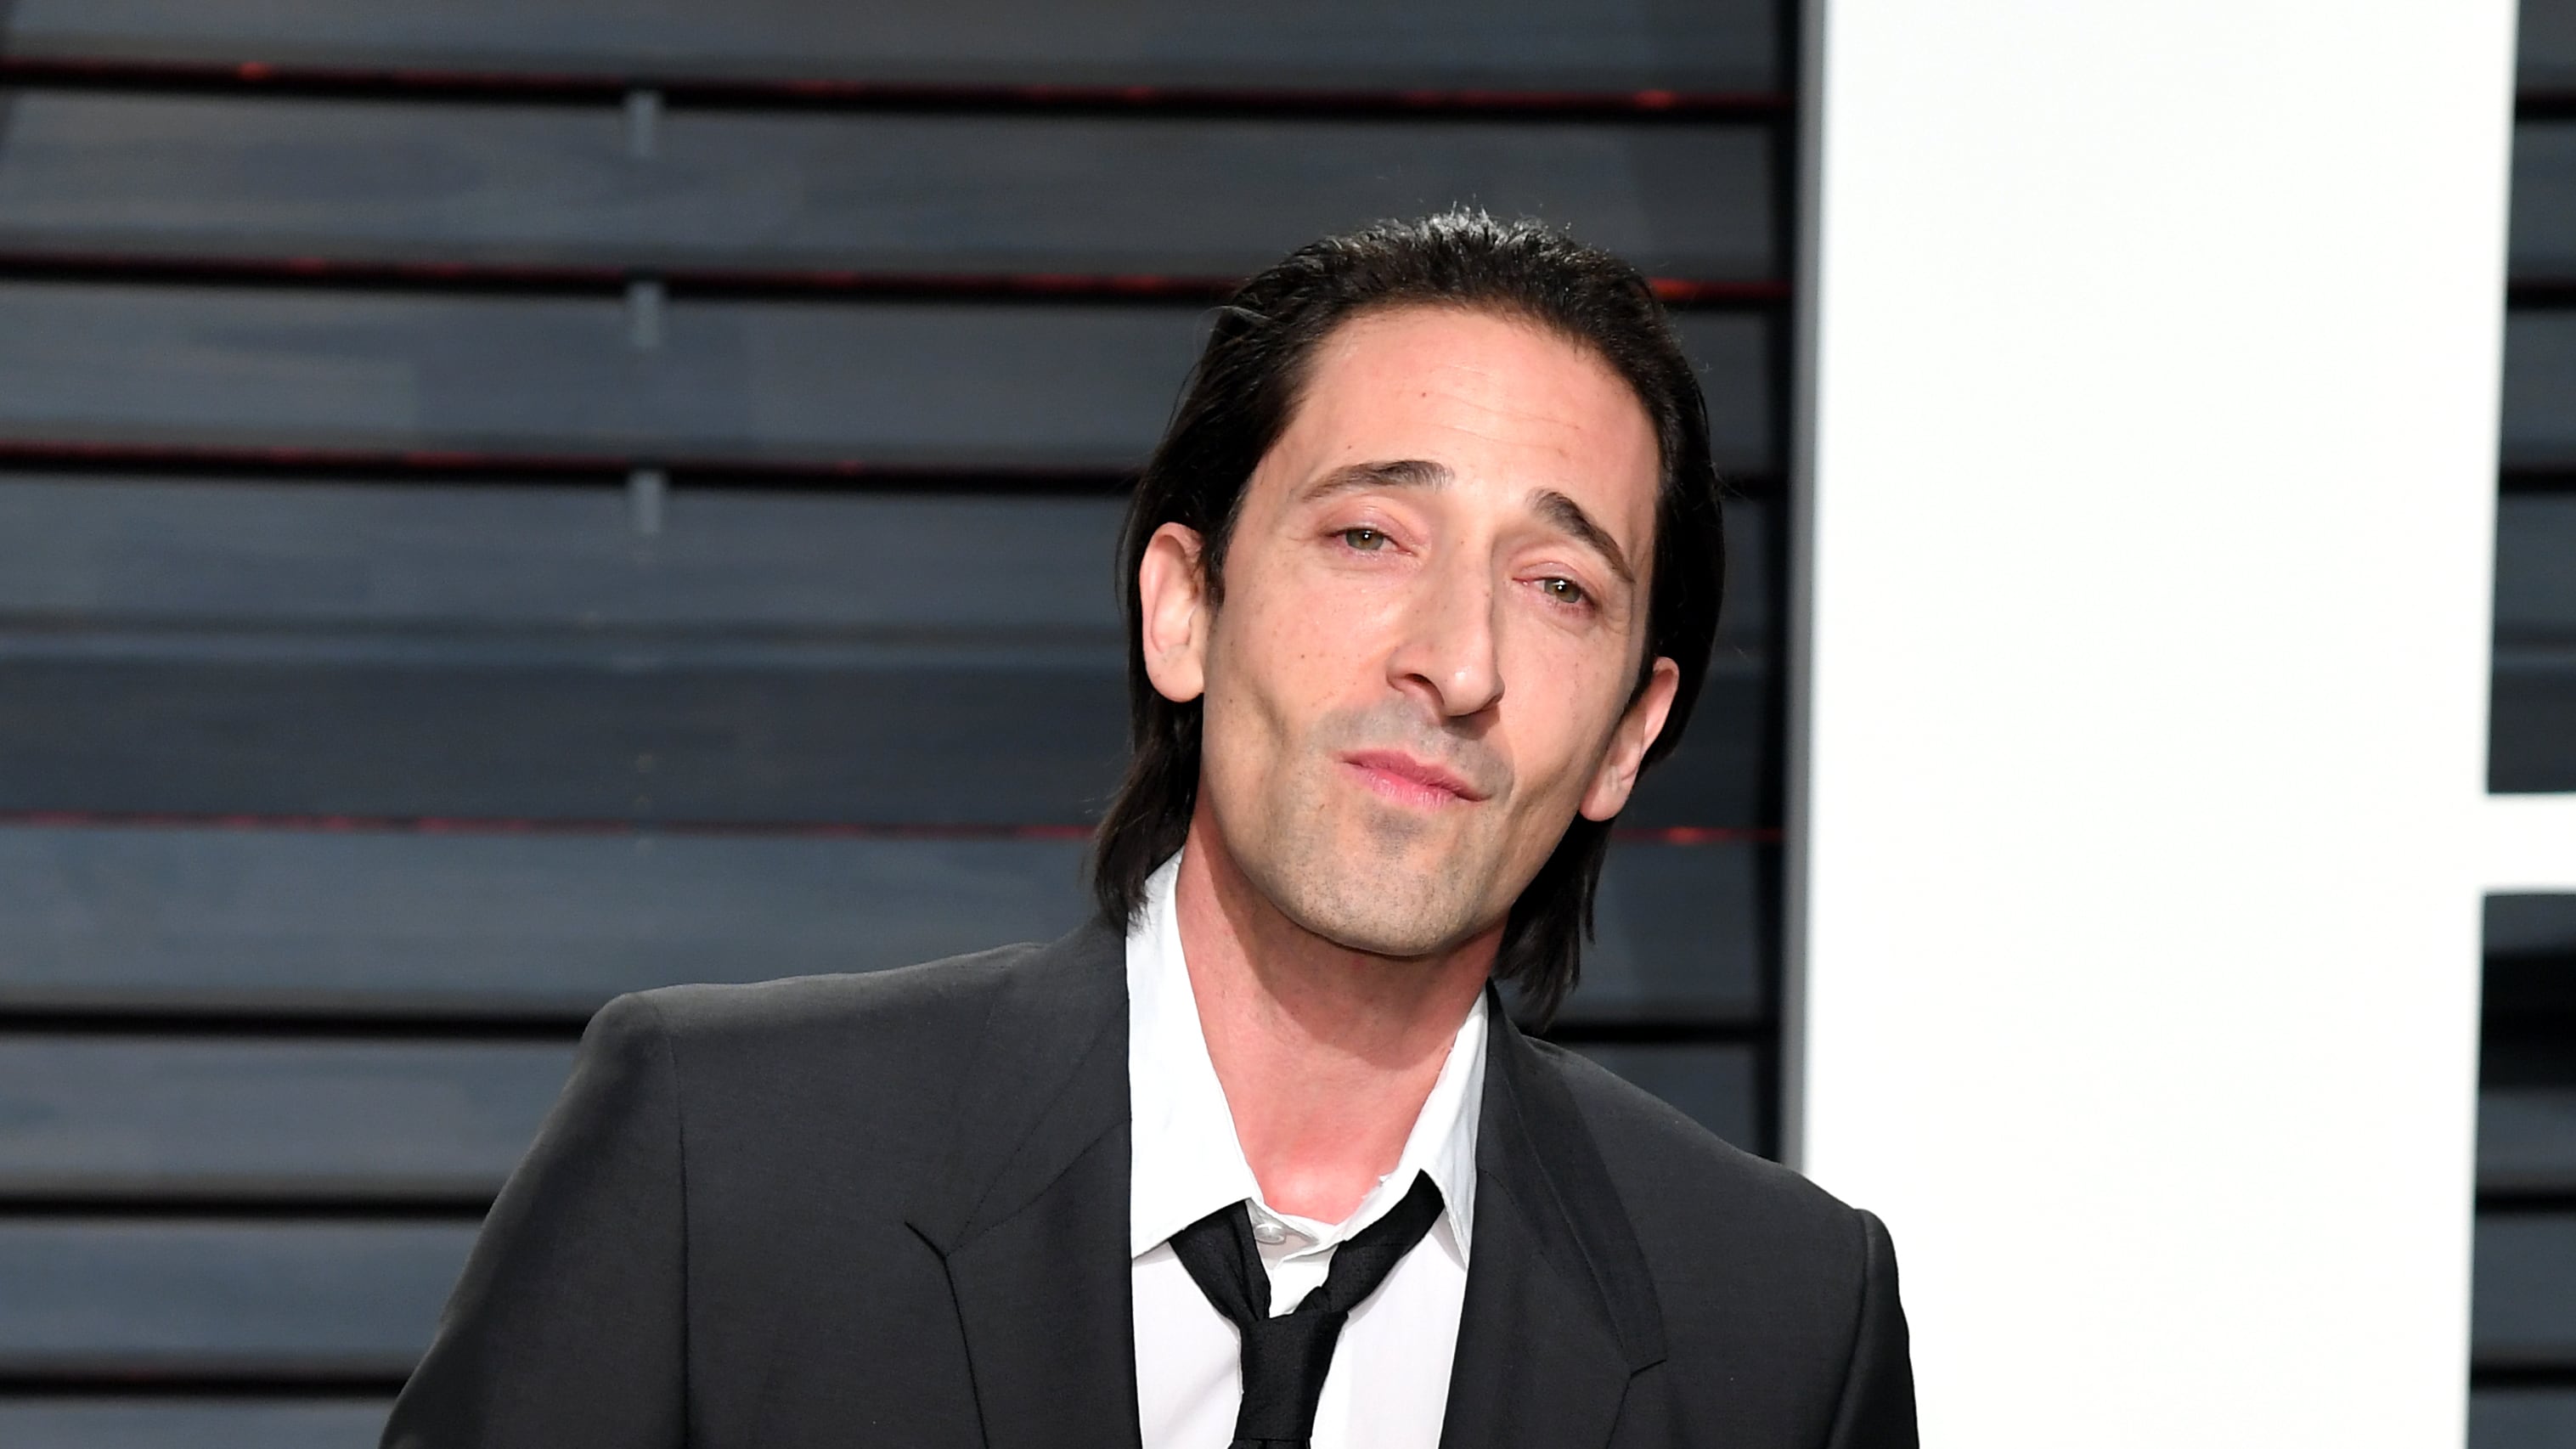 Adrien Brody will make his London theatre debut at the Donmar Warehouse in a production of The Fear of 13